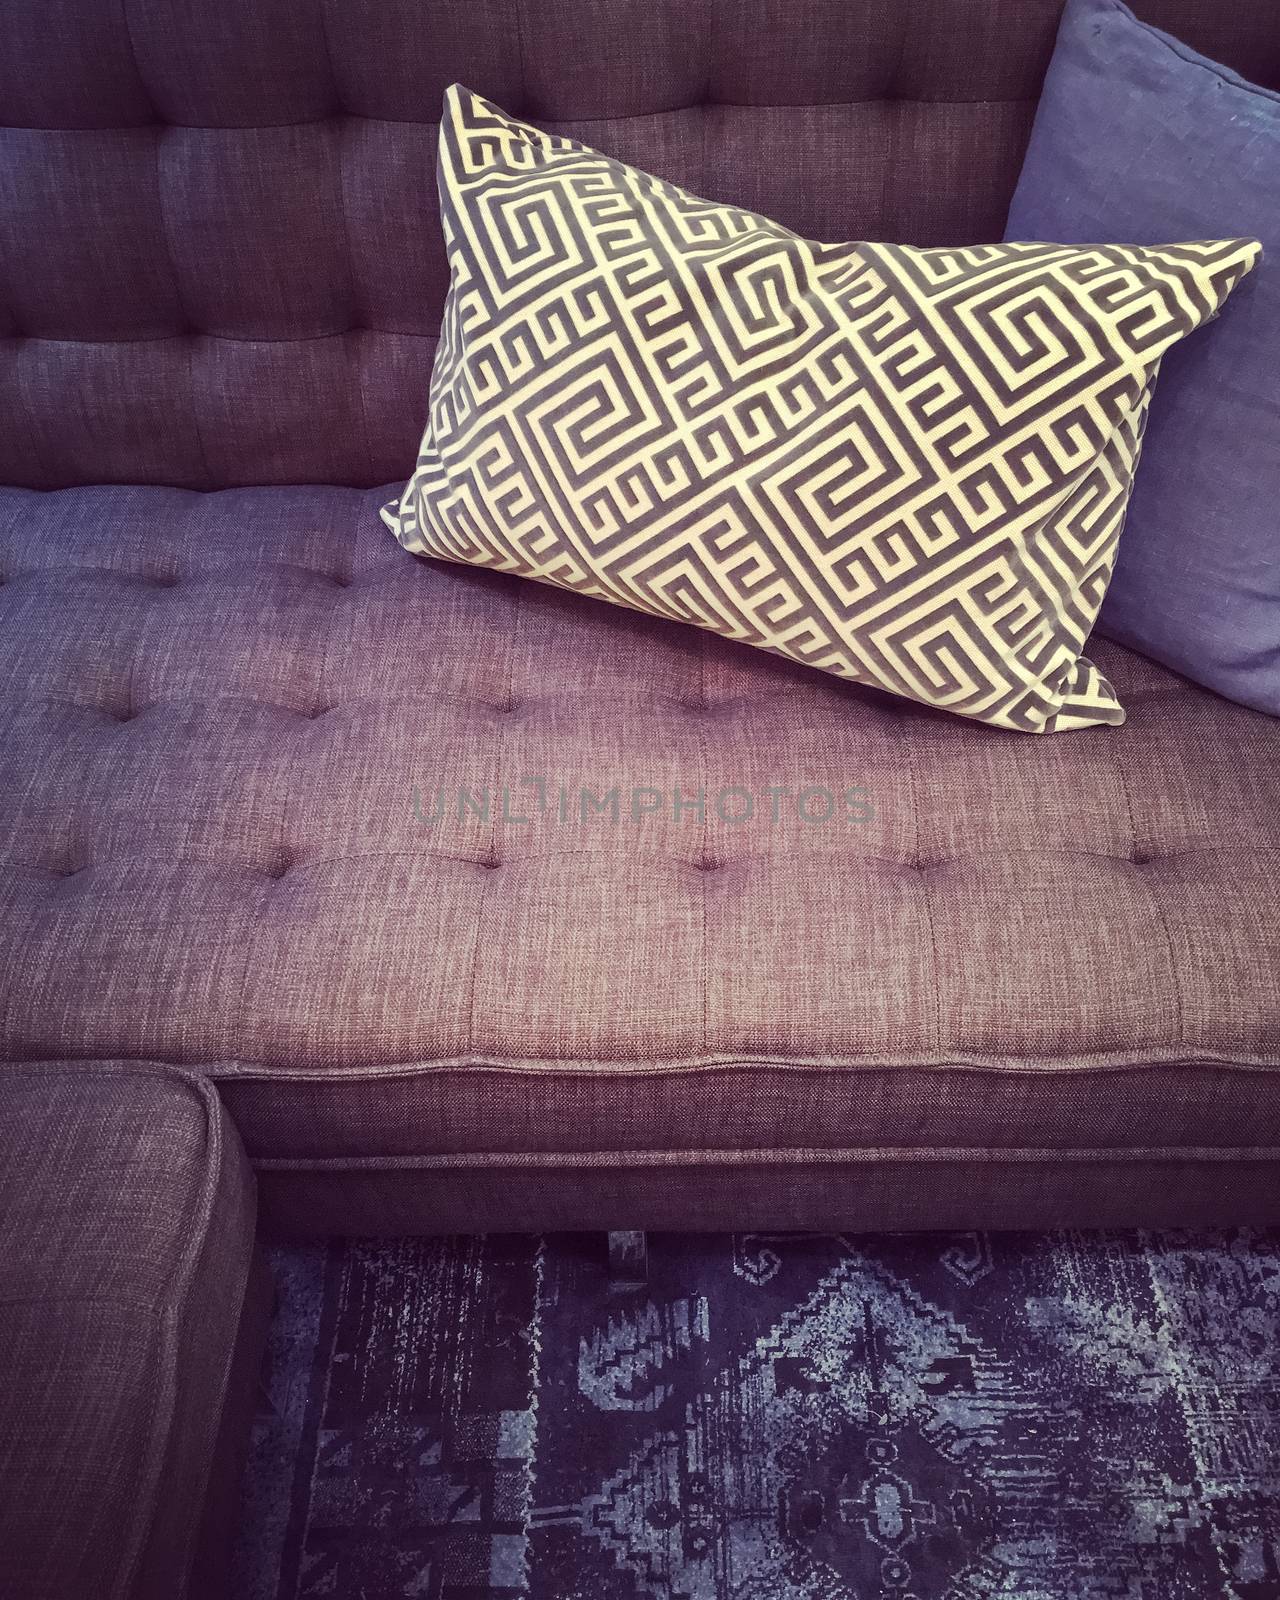 Fancy sofa with decorative cushions. Contemporary furniture.